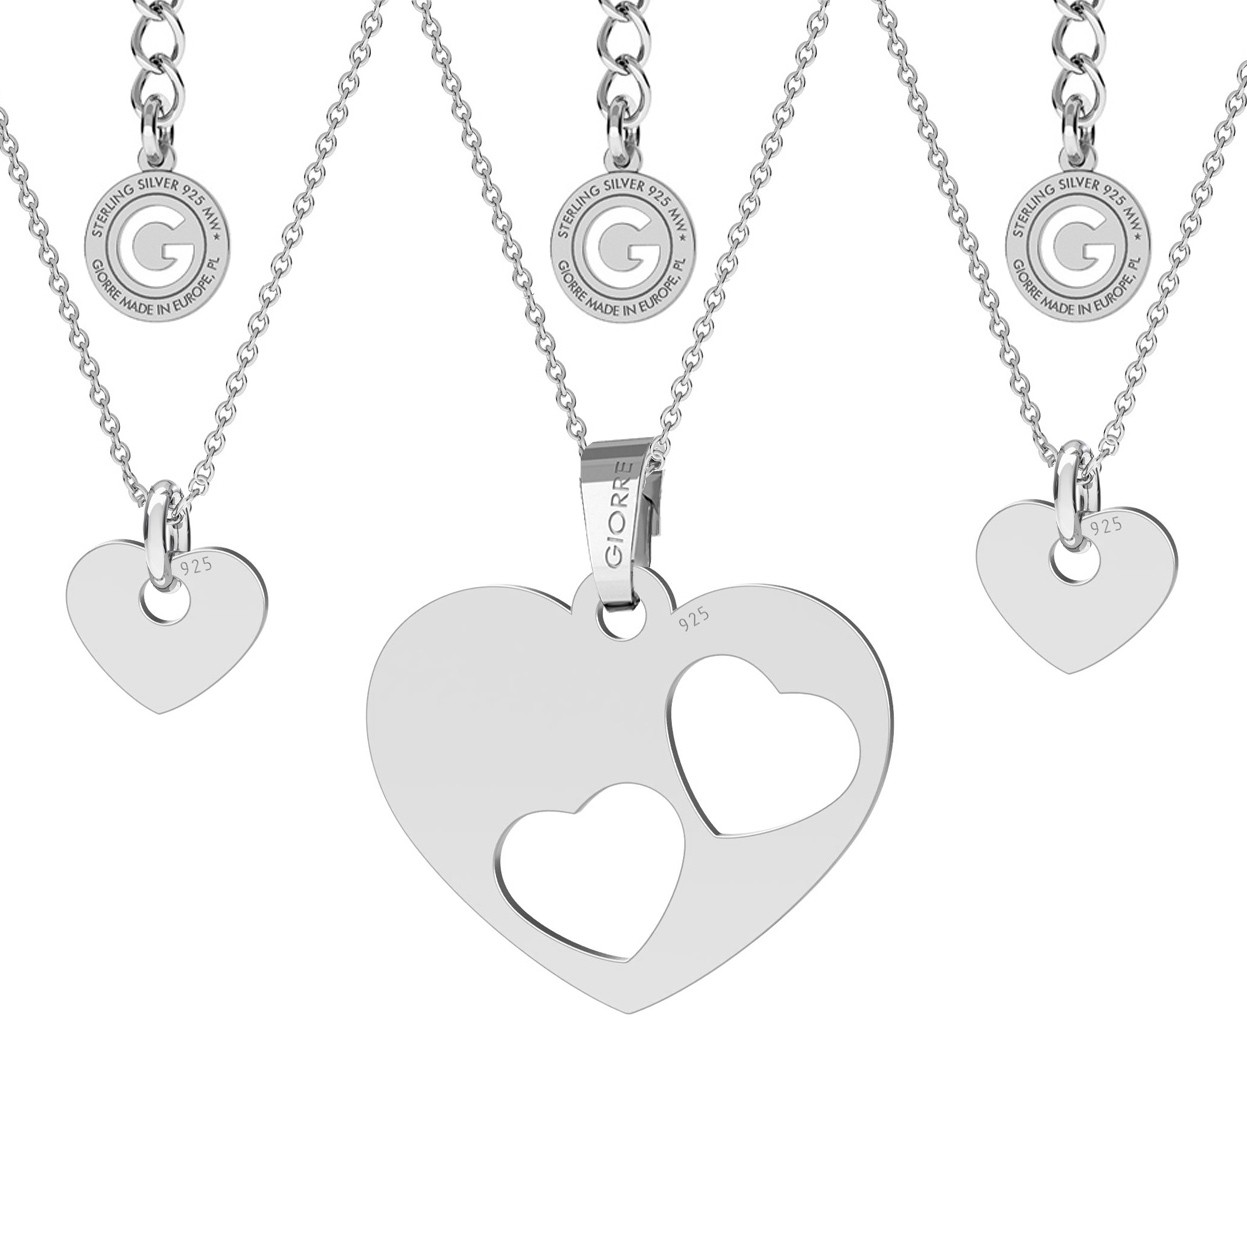 NECKLACE FOR MOTHER & CHILD, HEART ENGRAVEING, STERLING SILVER 925